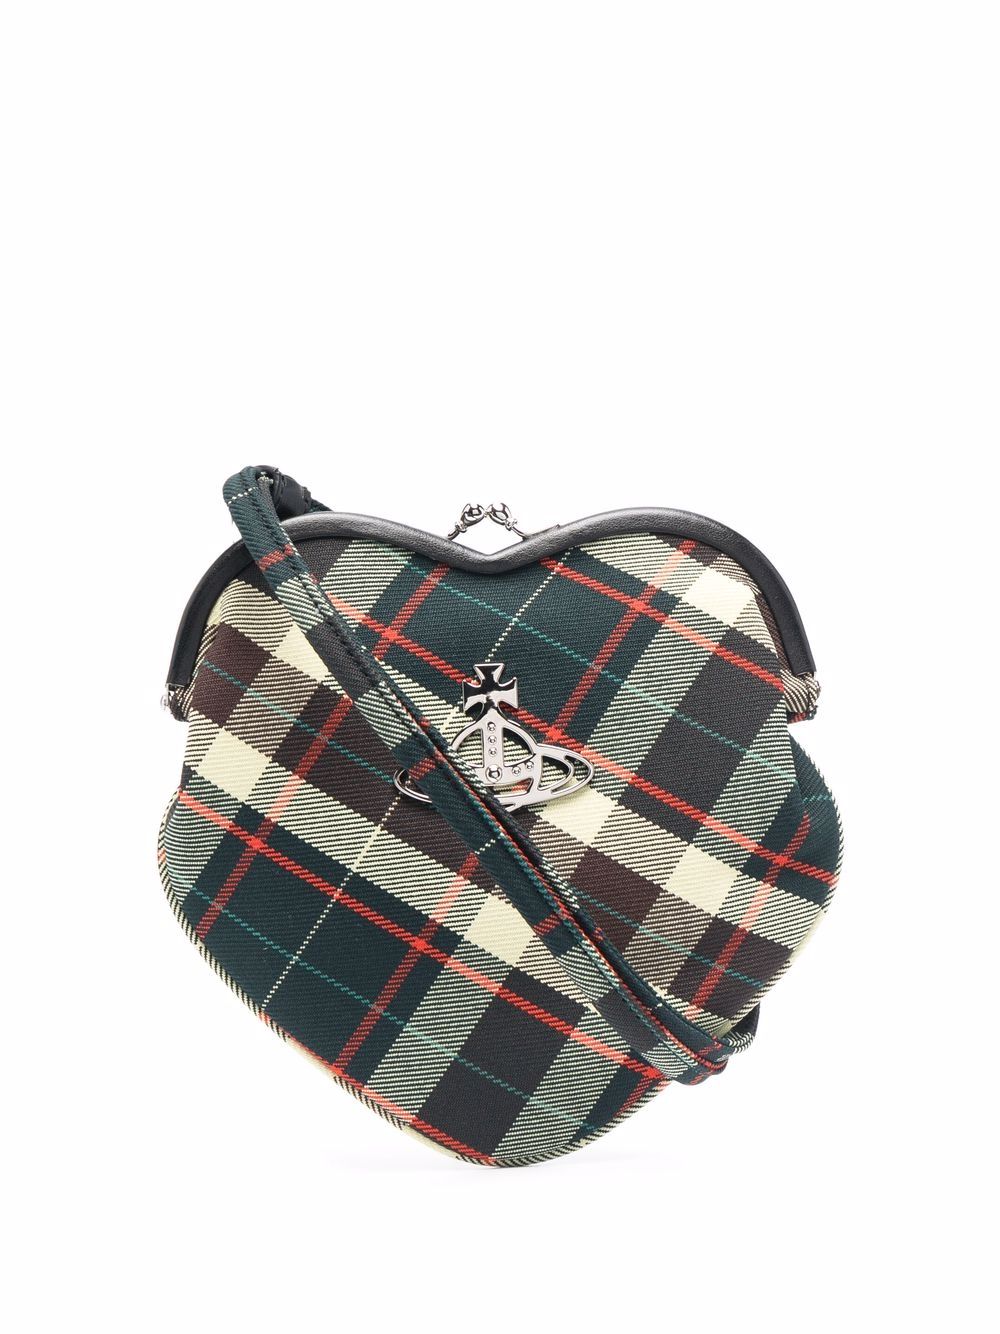 Vivienne Westwood heart-shaped patent-leather Card Holder - Farfetch